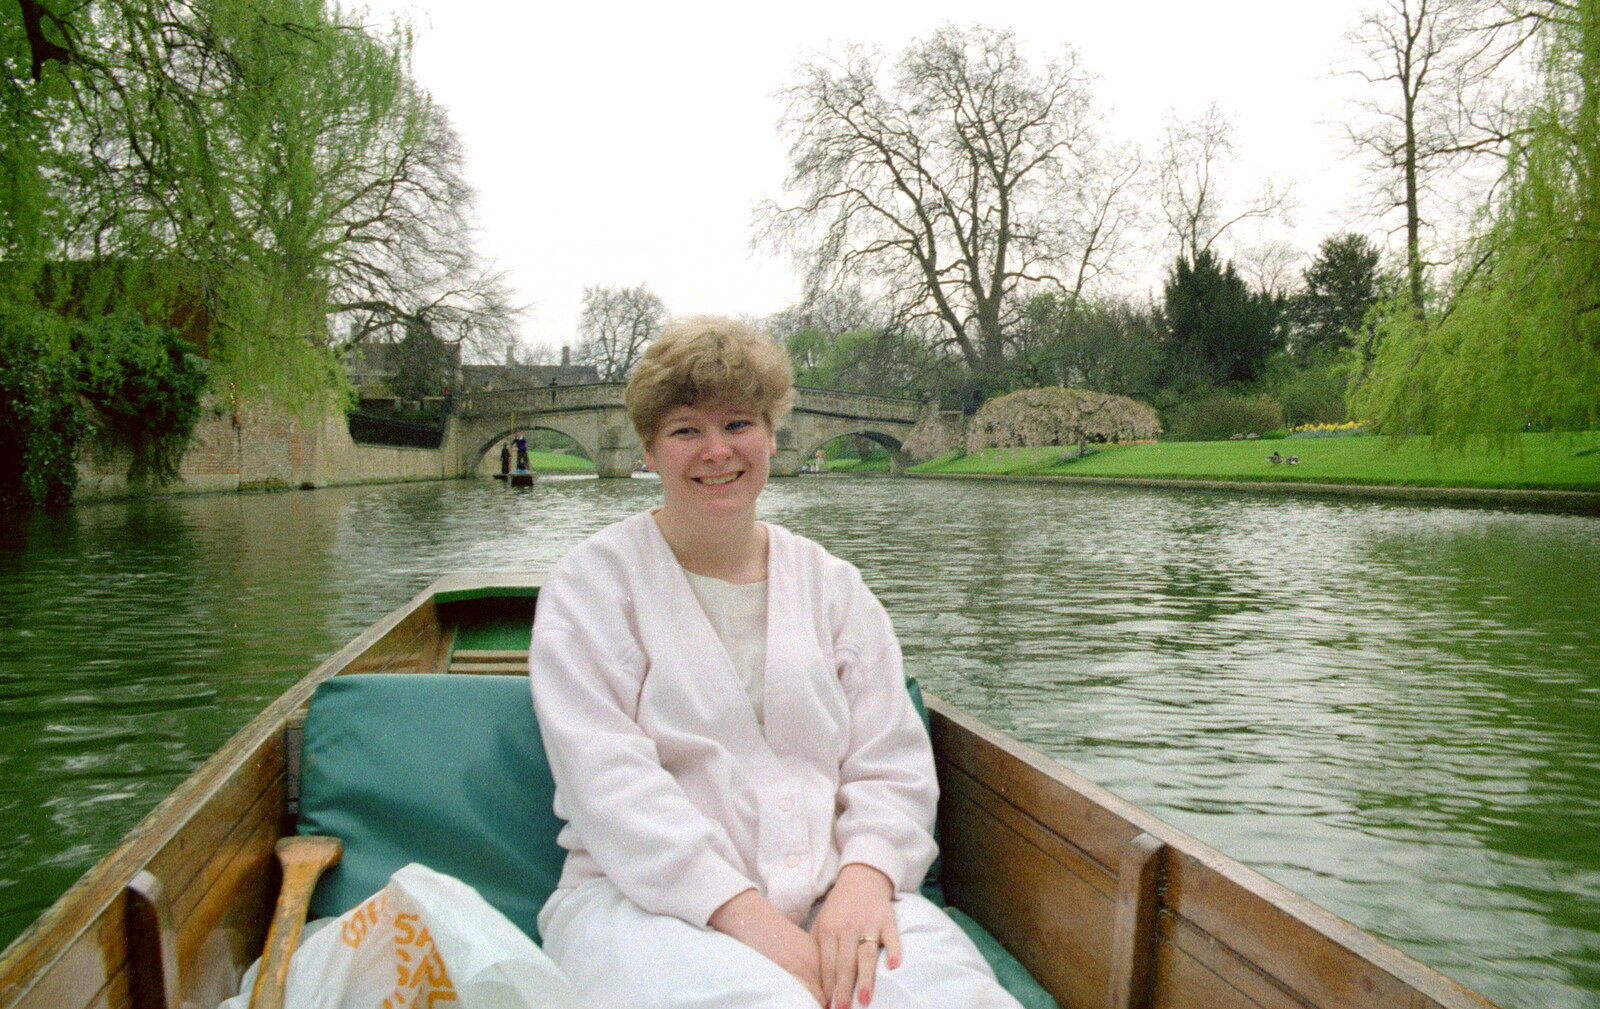 Anna in the back of the punt from A Trip to Trinity College, Cambridge - 23rd March 1986